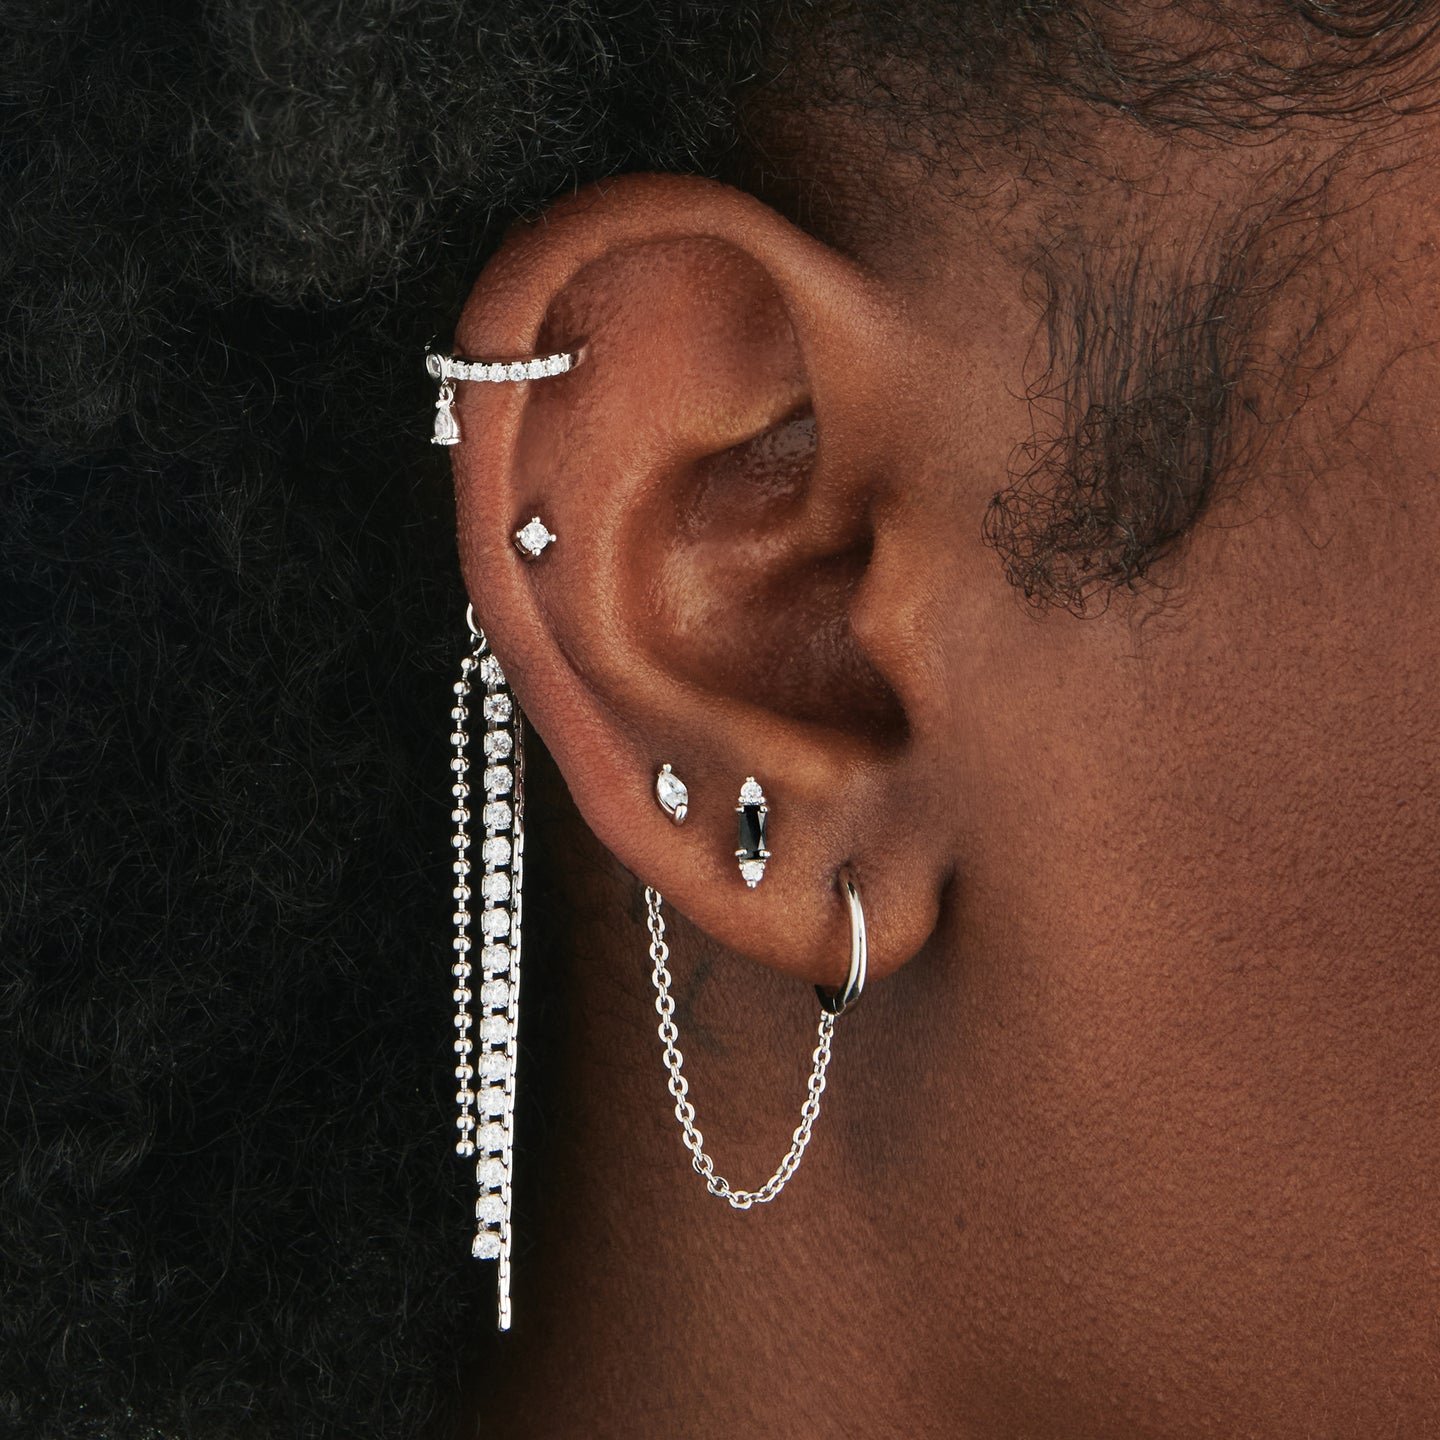 An image of a silver butterfly earring back that has pave chain charms in silver soldered to it with a mini CZ stud in silver/clear on ear. [hover] color:null|silver/clear